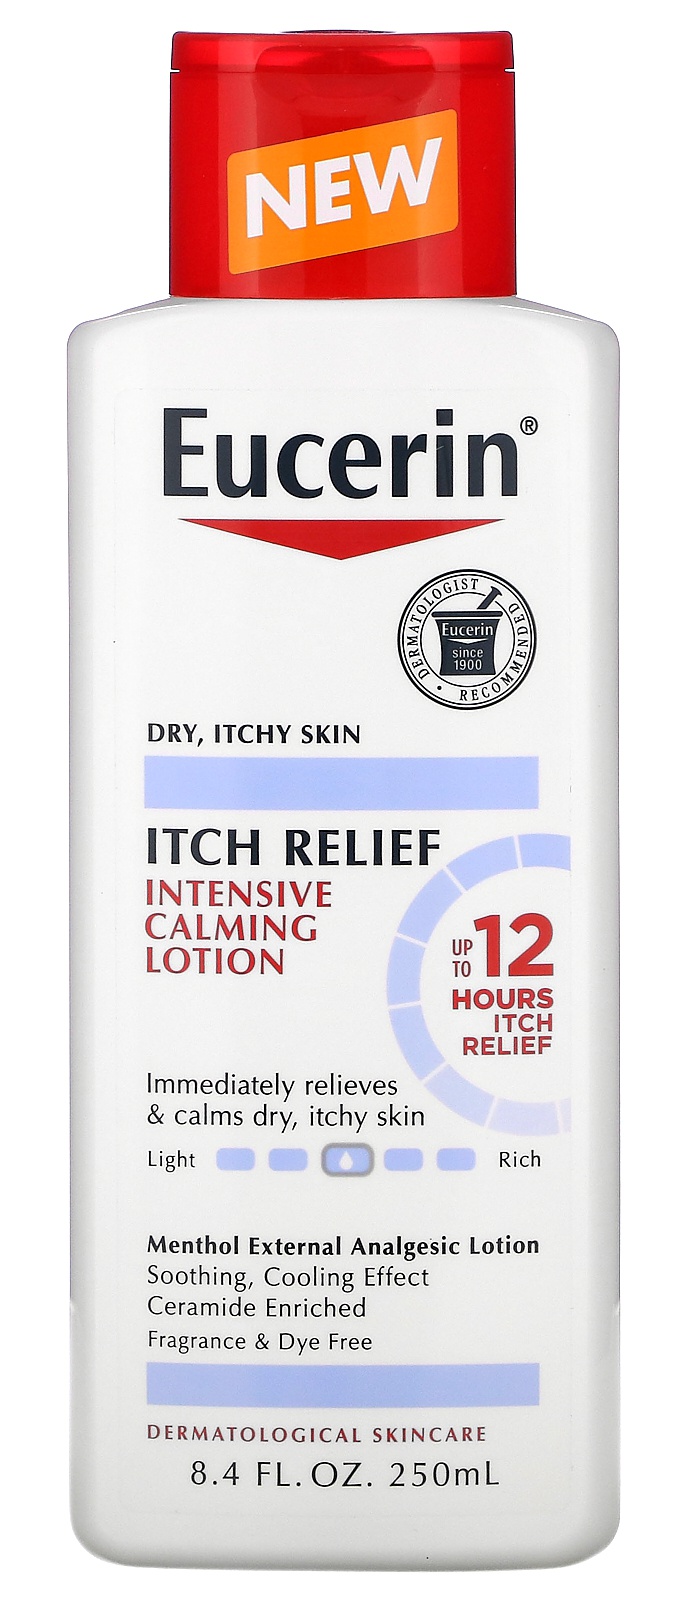 Eucerin Itch Relief Intensive Calming Lotion